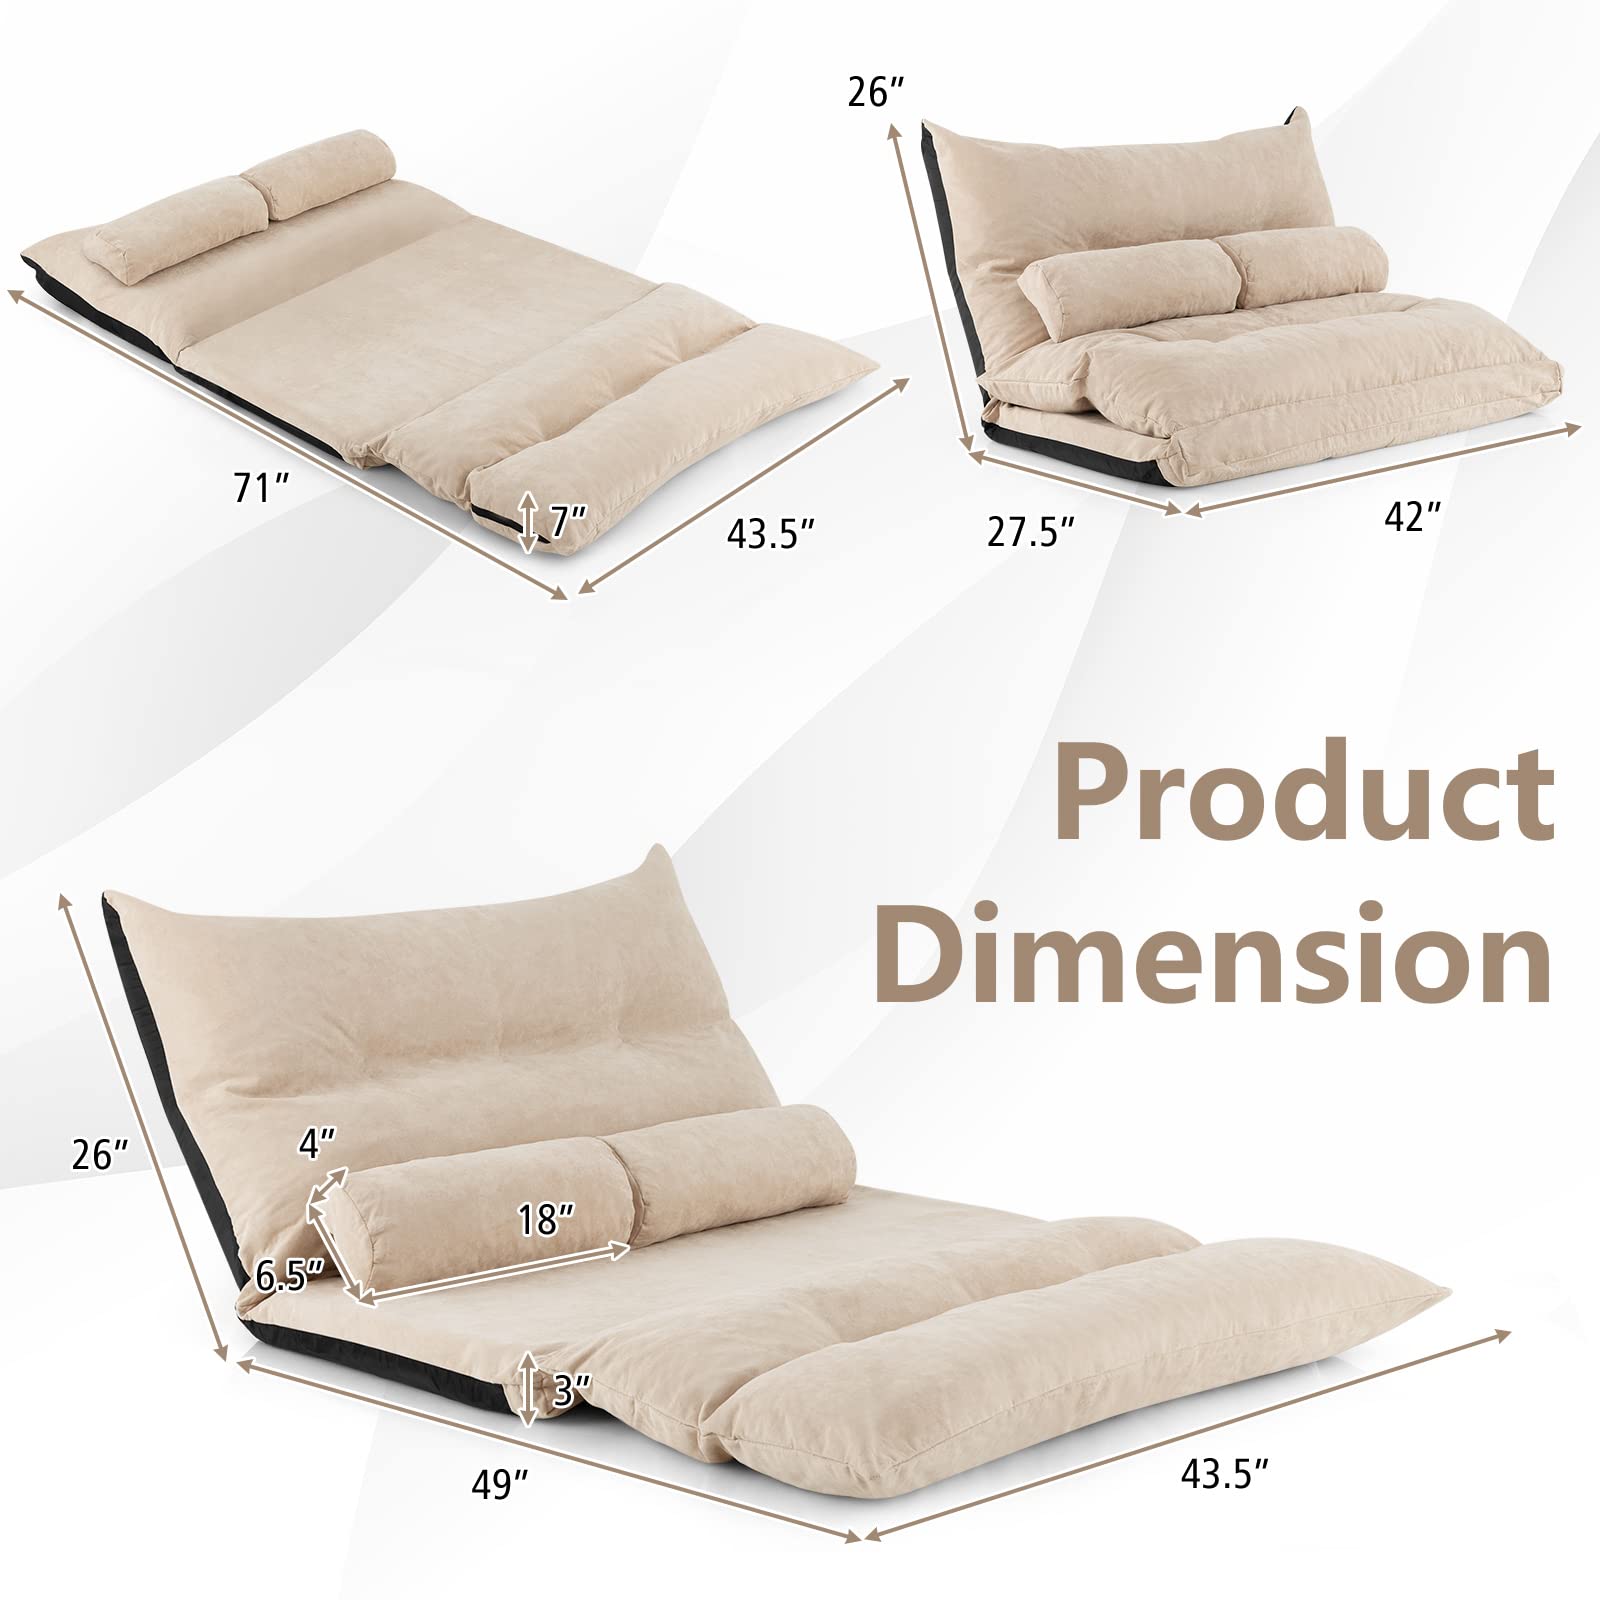 Giantex Adjustable Floor Sofa Bed, Foldable Lazy Couch Bed with Adjustable Backrest